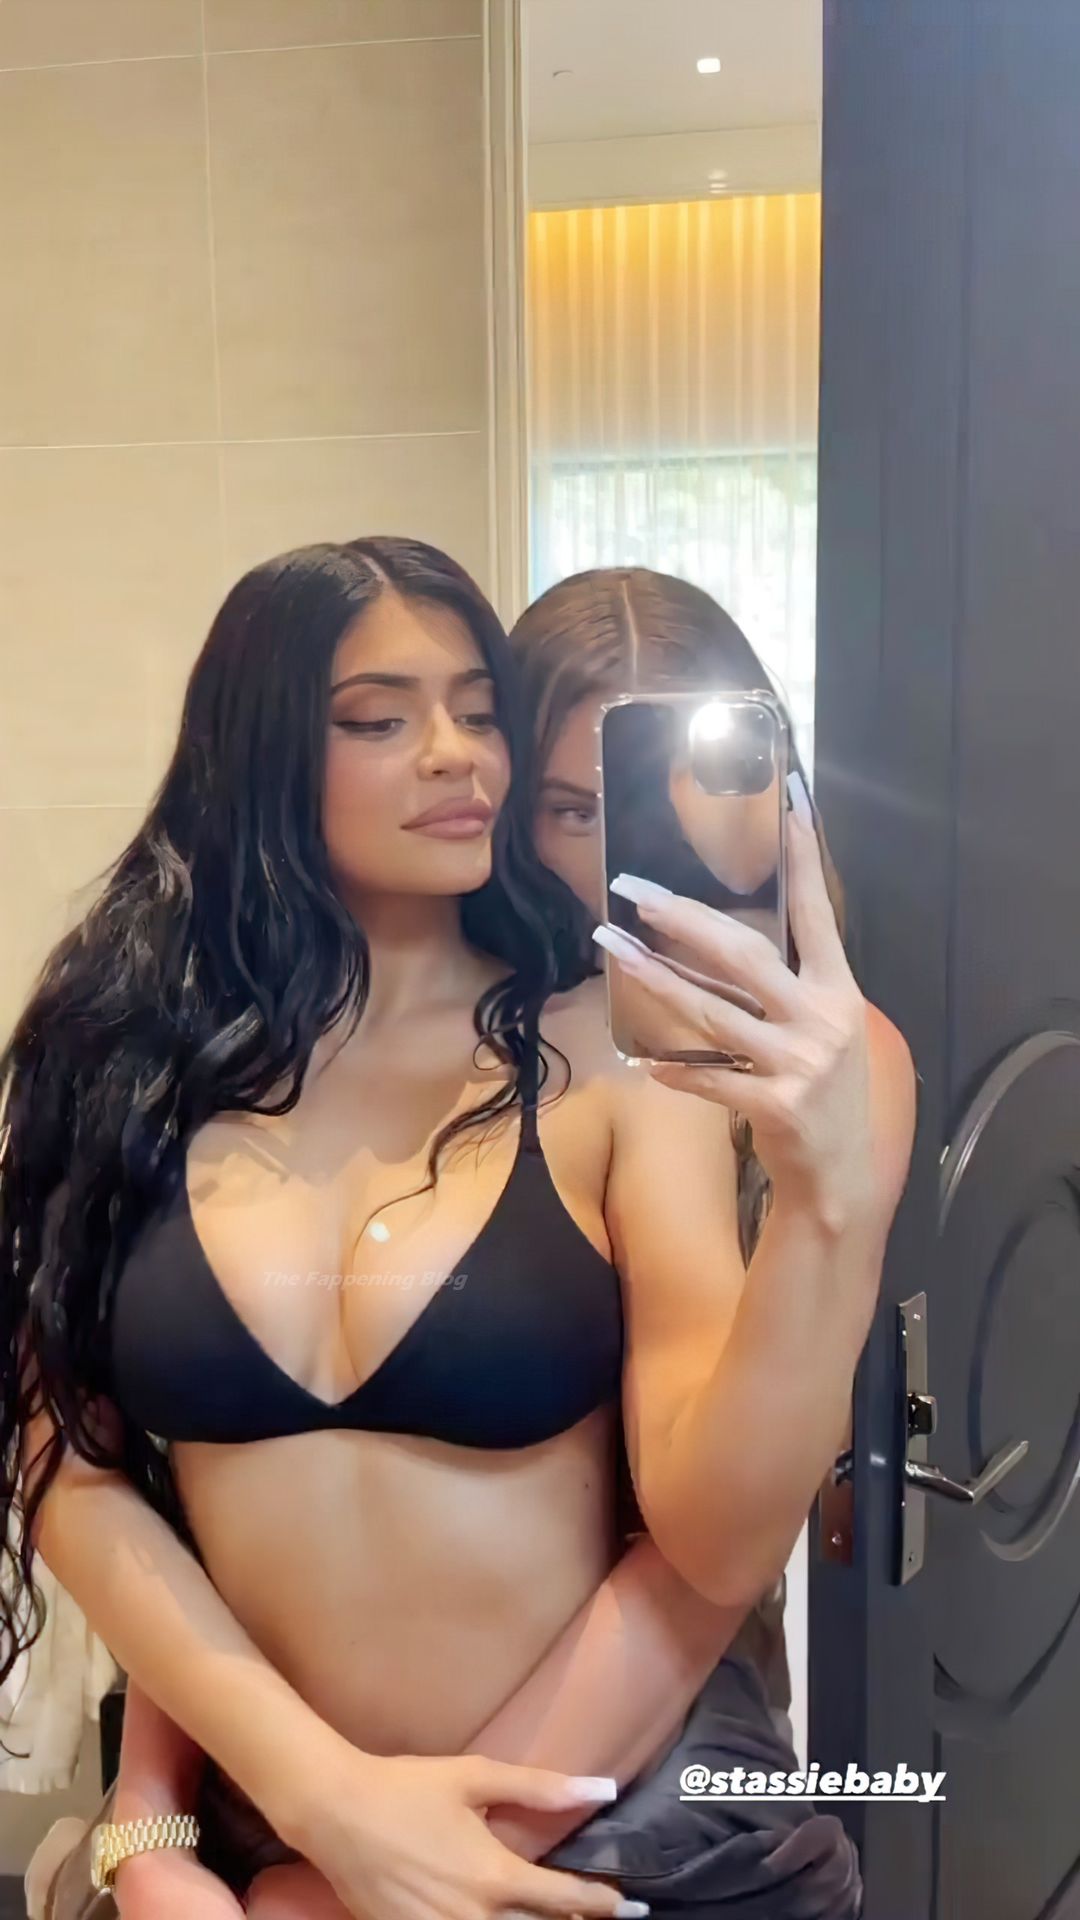 Kylie-Jenner-Sexy-Breasts-in-Black-Bra-thefappeningblog.com-220-.jpg